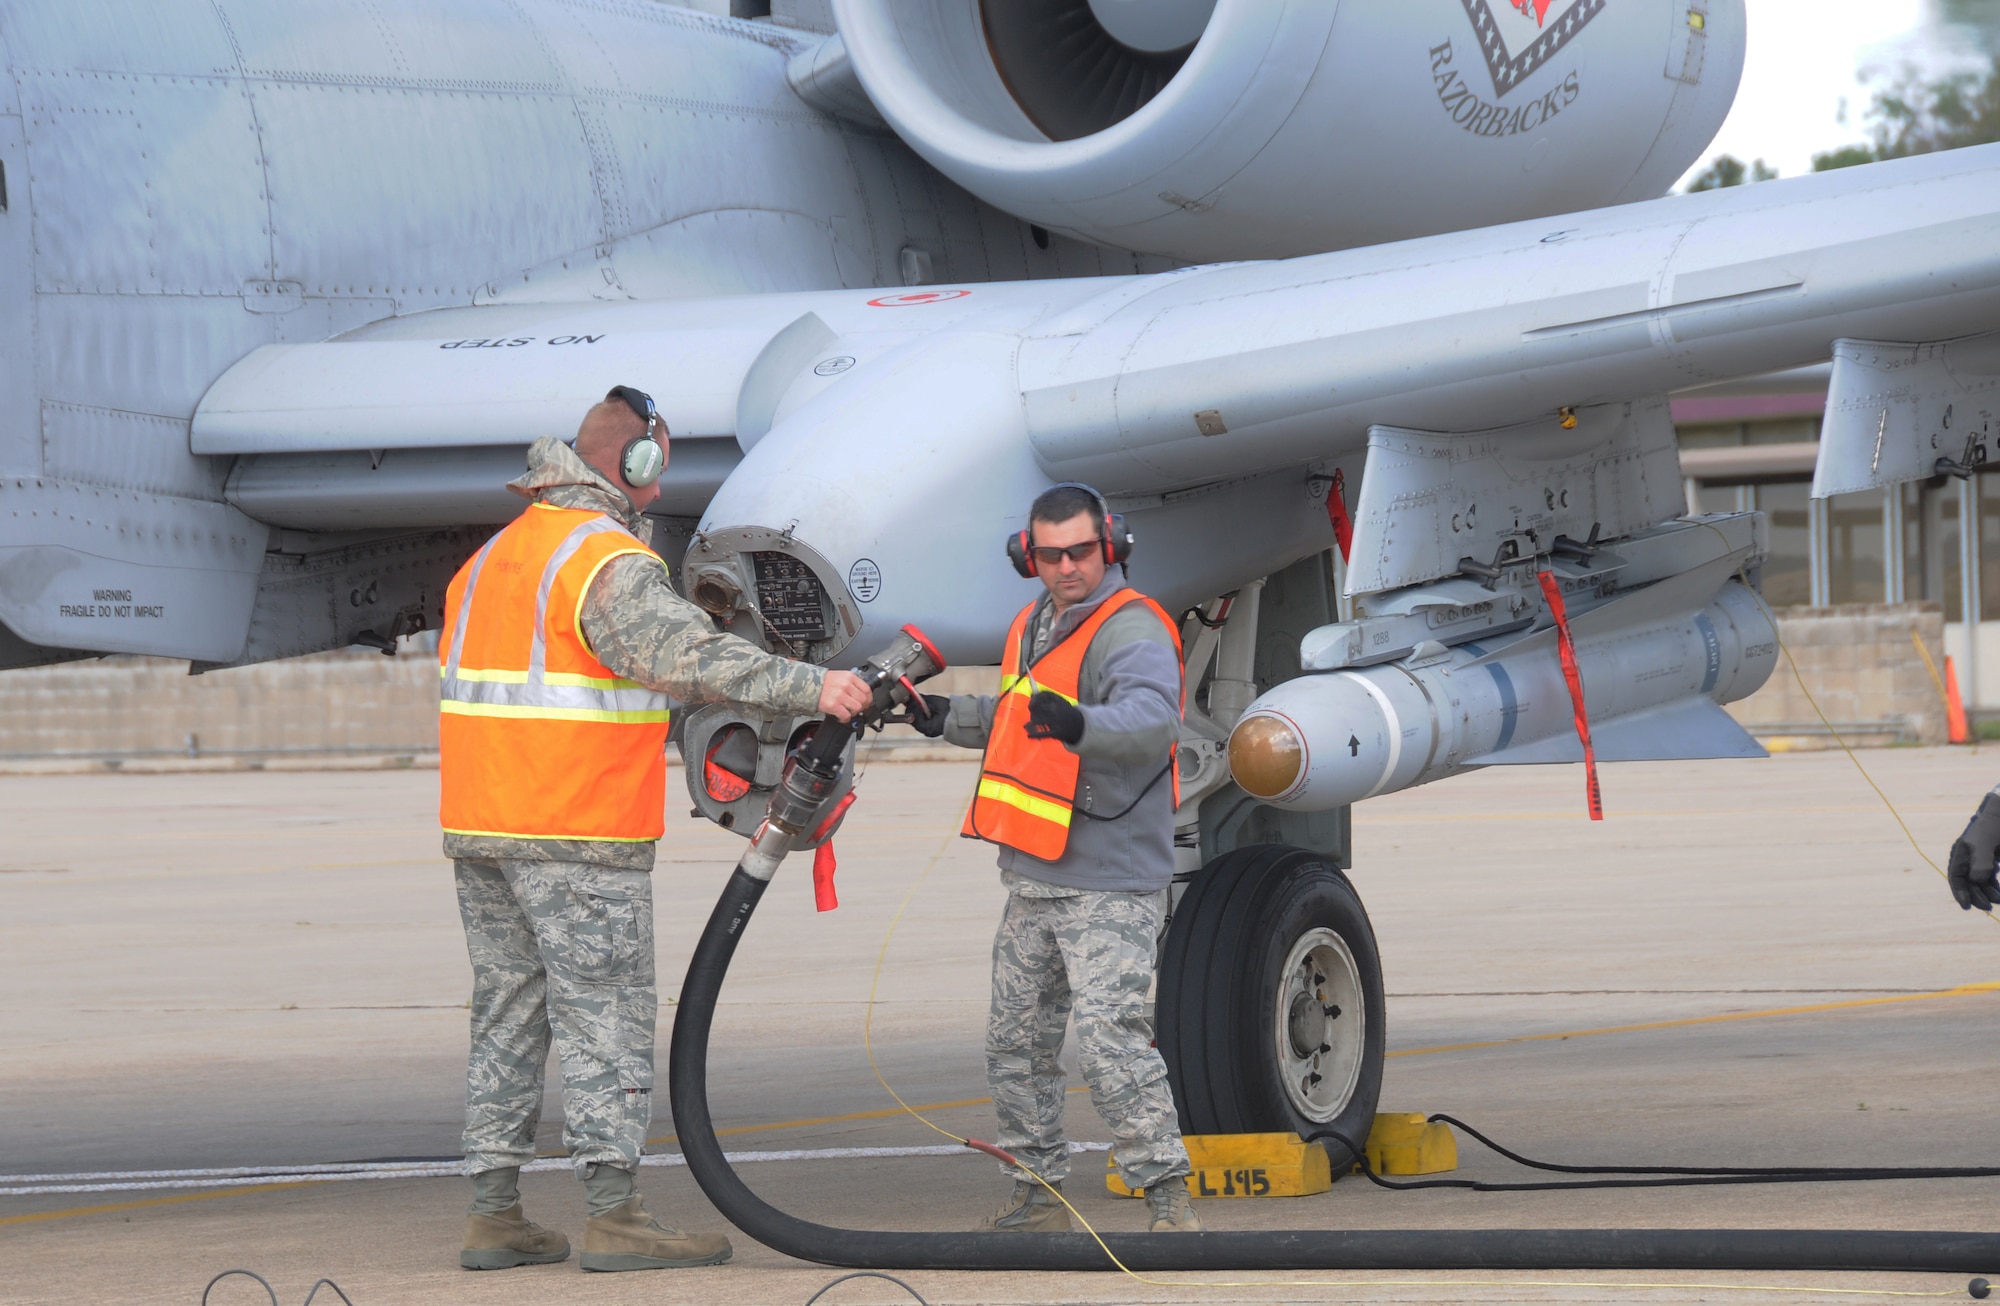 Staff Sgt. Nick Warrick of the 188th Fighter Wing, Arkansas Air National Guard, passes a fuel hose to Technical Sgt. Briane McCaslin after a hot-pit refueling of an A-10C Thunderbolt II at Ebbing Air National Guard Base, Fort Smith, Ark., April 24, 2013. (U.S. Air National Guard photo by Senior Airman John Hillier/188th Fighter Wing Public Affairs)